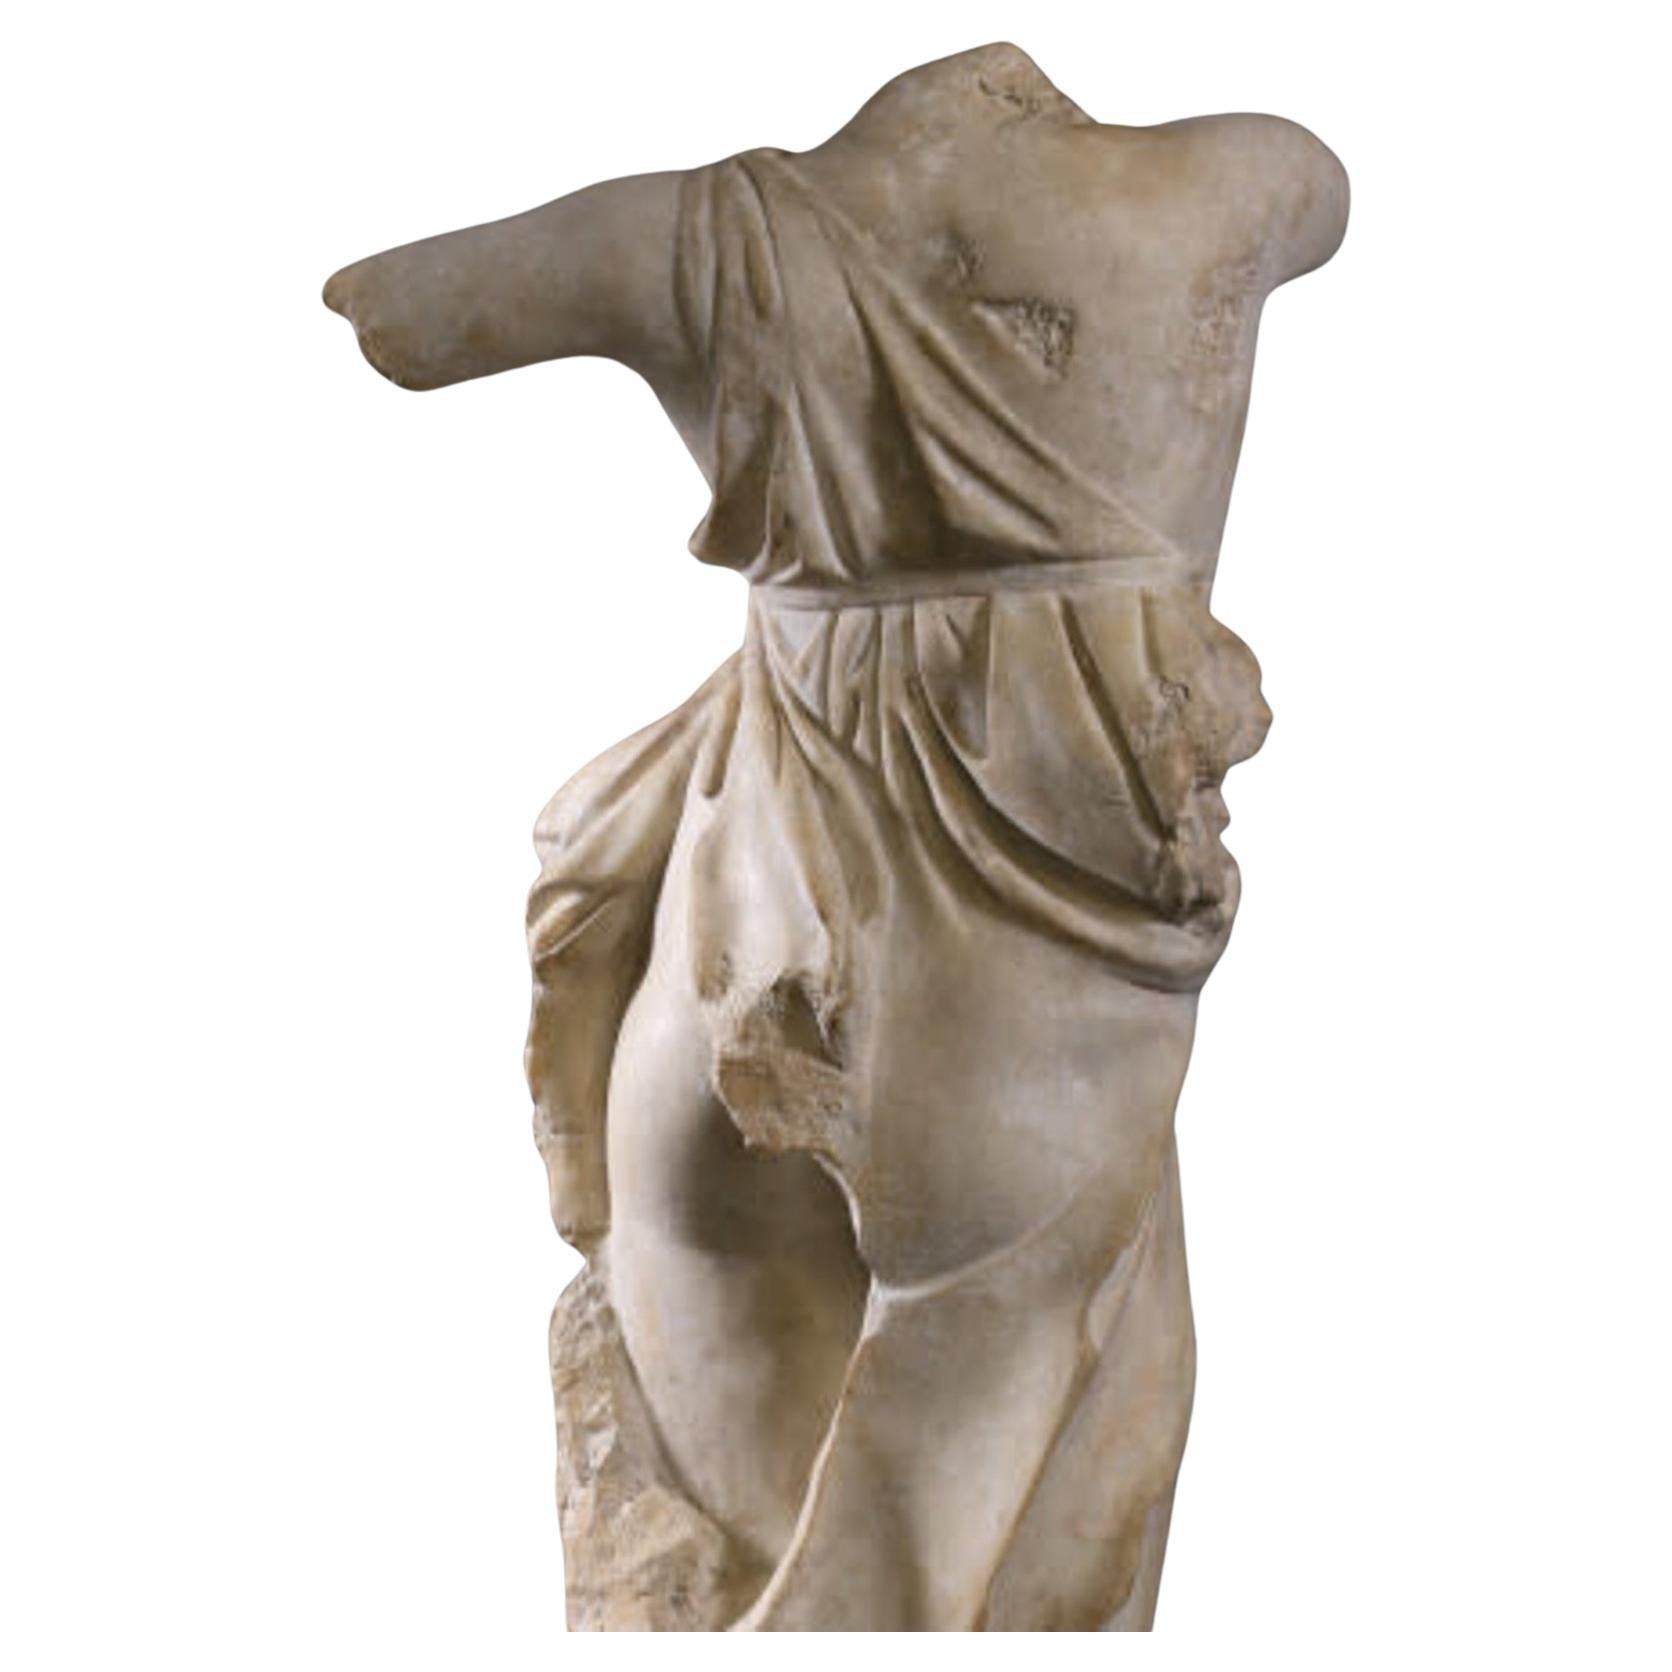 This Tivoli dancer's bust is a fragment of an original statue dating back probably to the 4th century BC and is conserved in the archeological museum of Rome.
This sumptuous, large, decorative sculpture is finely made with an elegant patina.
Sourced